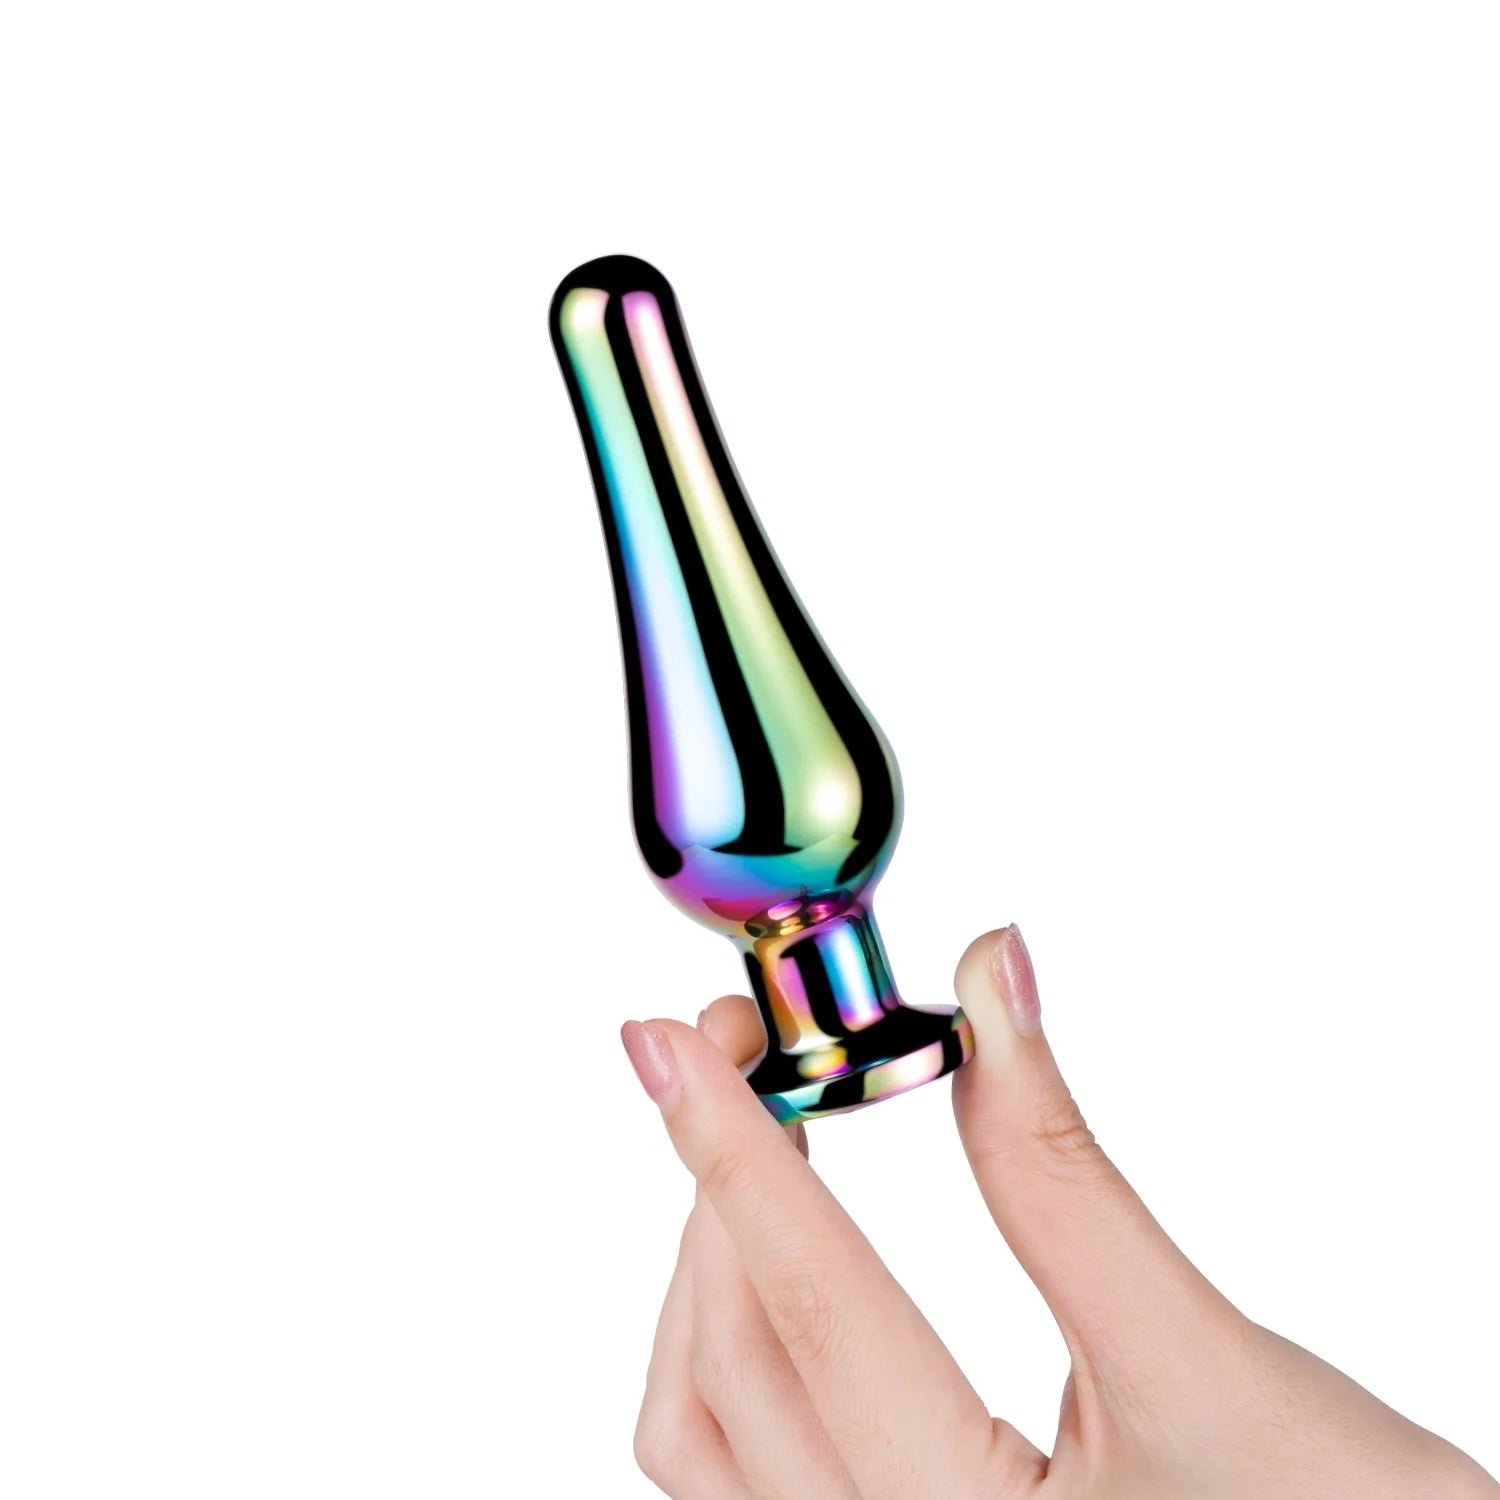 Vase Gem Radiance Curved Metal Gem Butt Plug: Add Glamour to Your Intimate Pleasure-BestGSpot